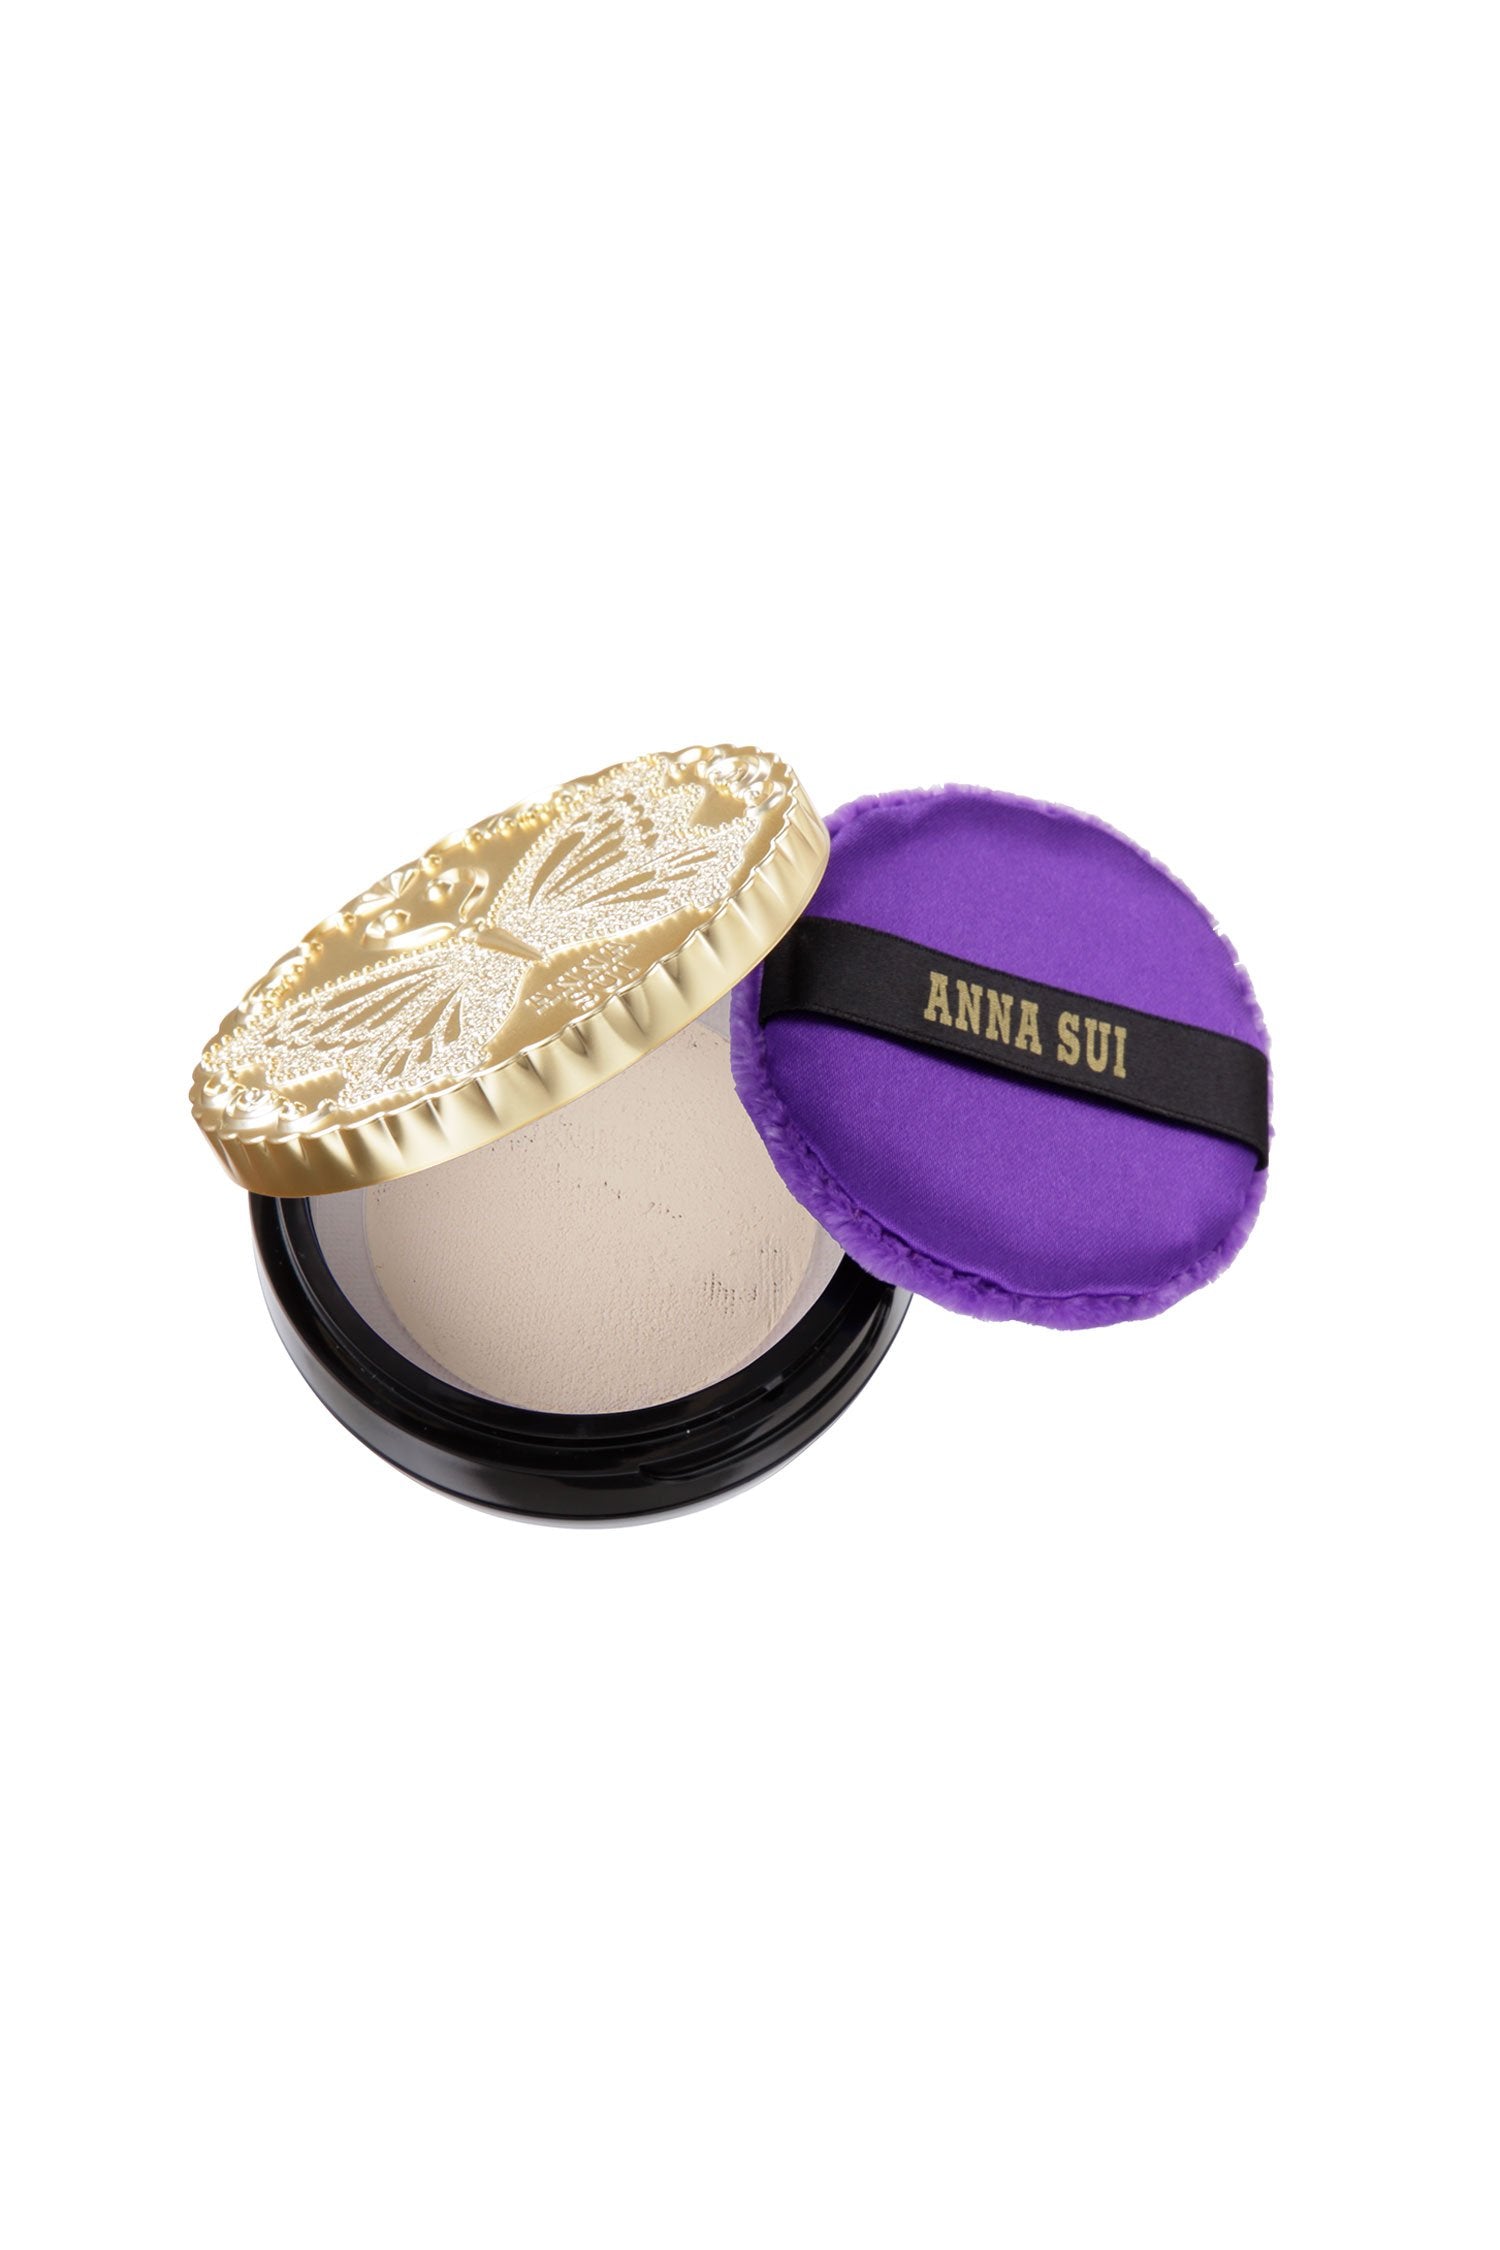 Mini Loose SHINY BEIGE Powder Set, round black case, with a golden lid with engraved butterfly on top, and a purple pad.